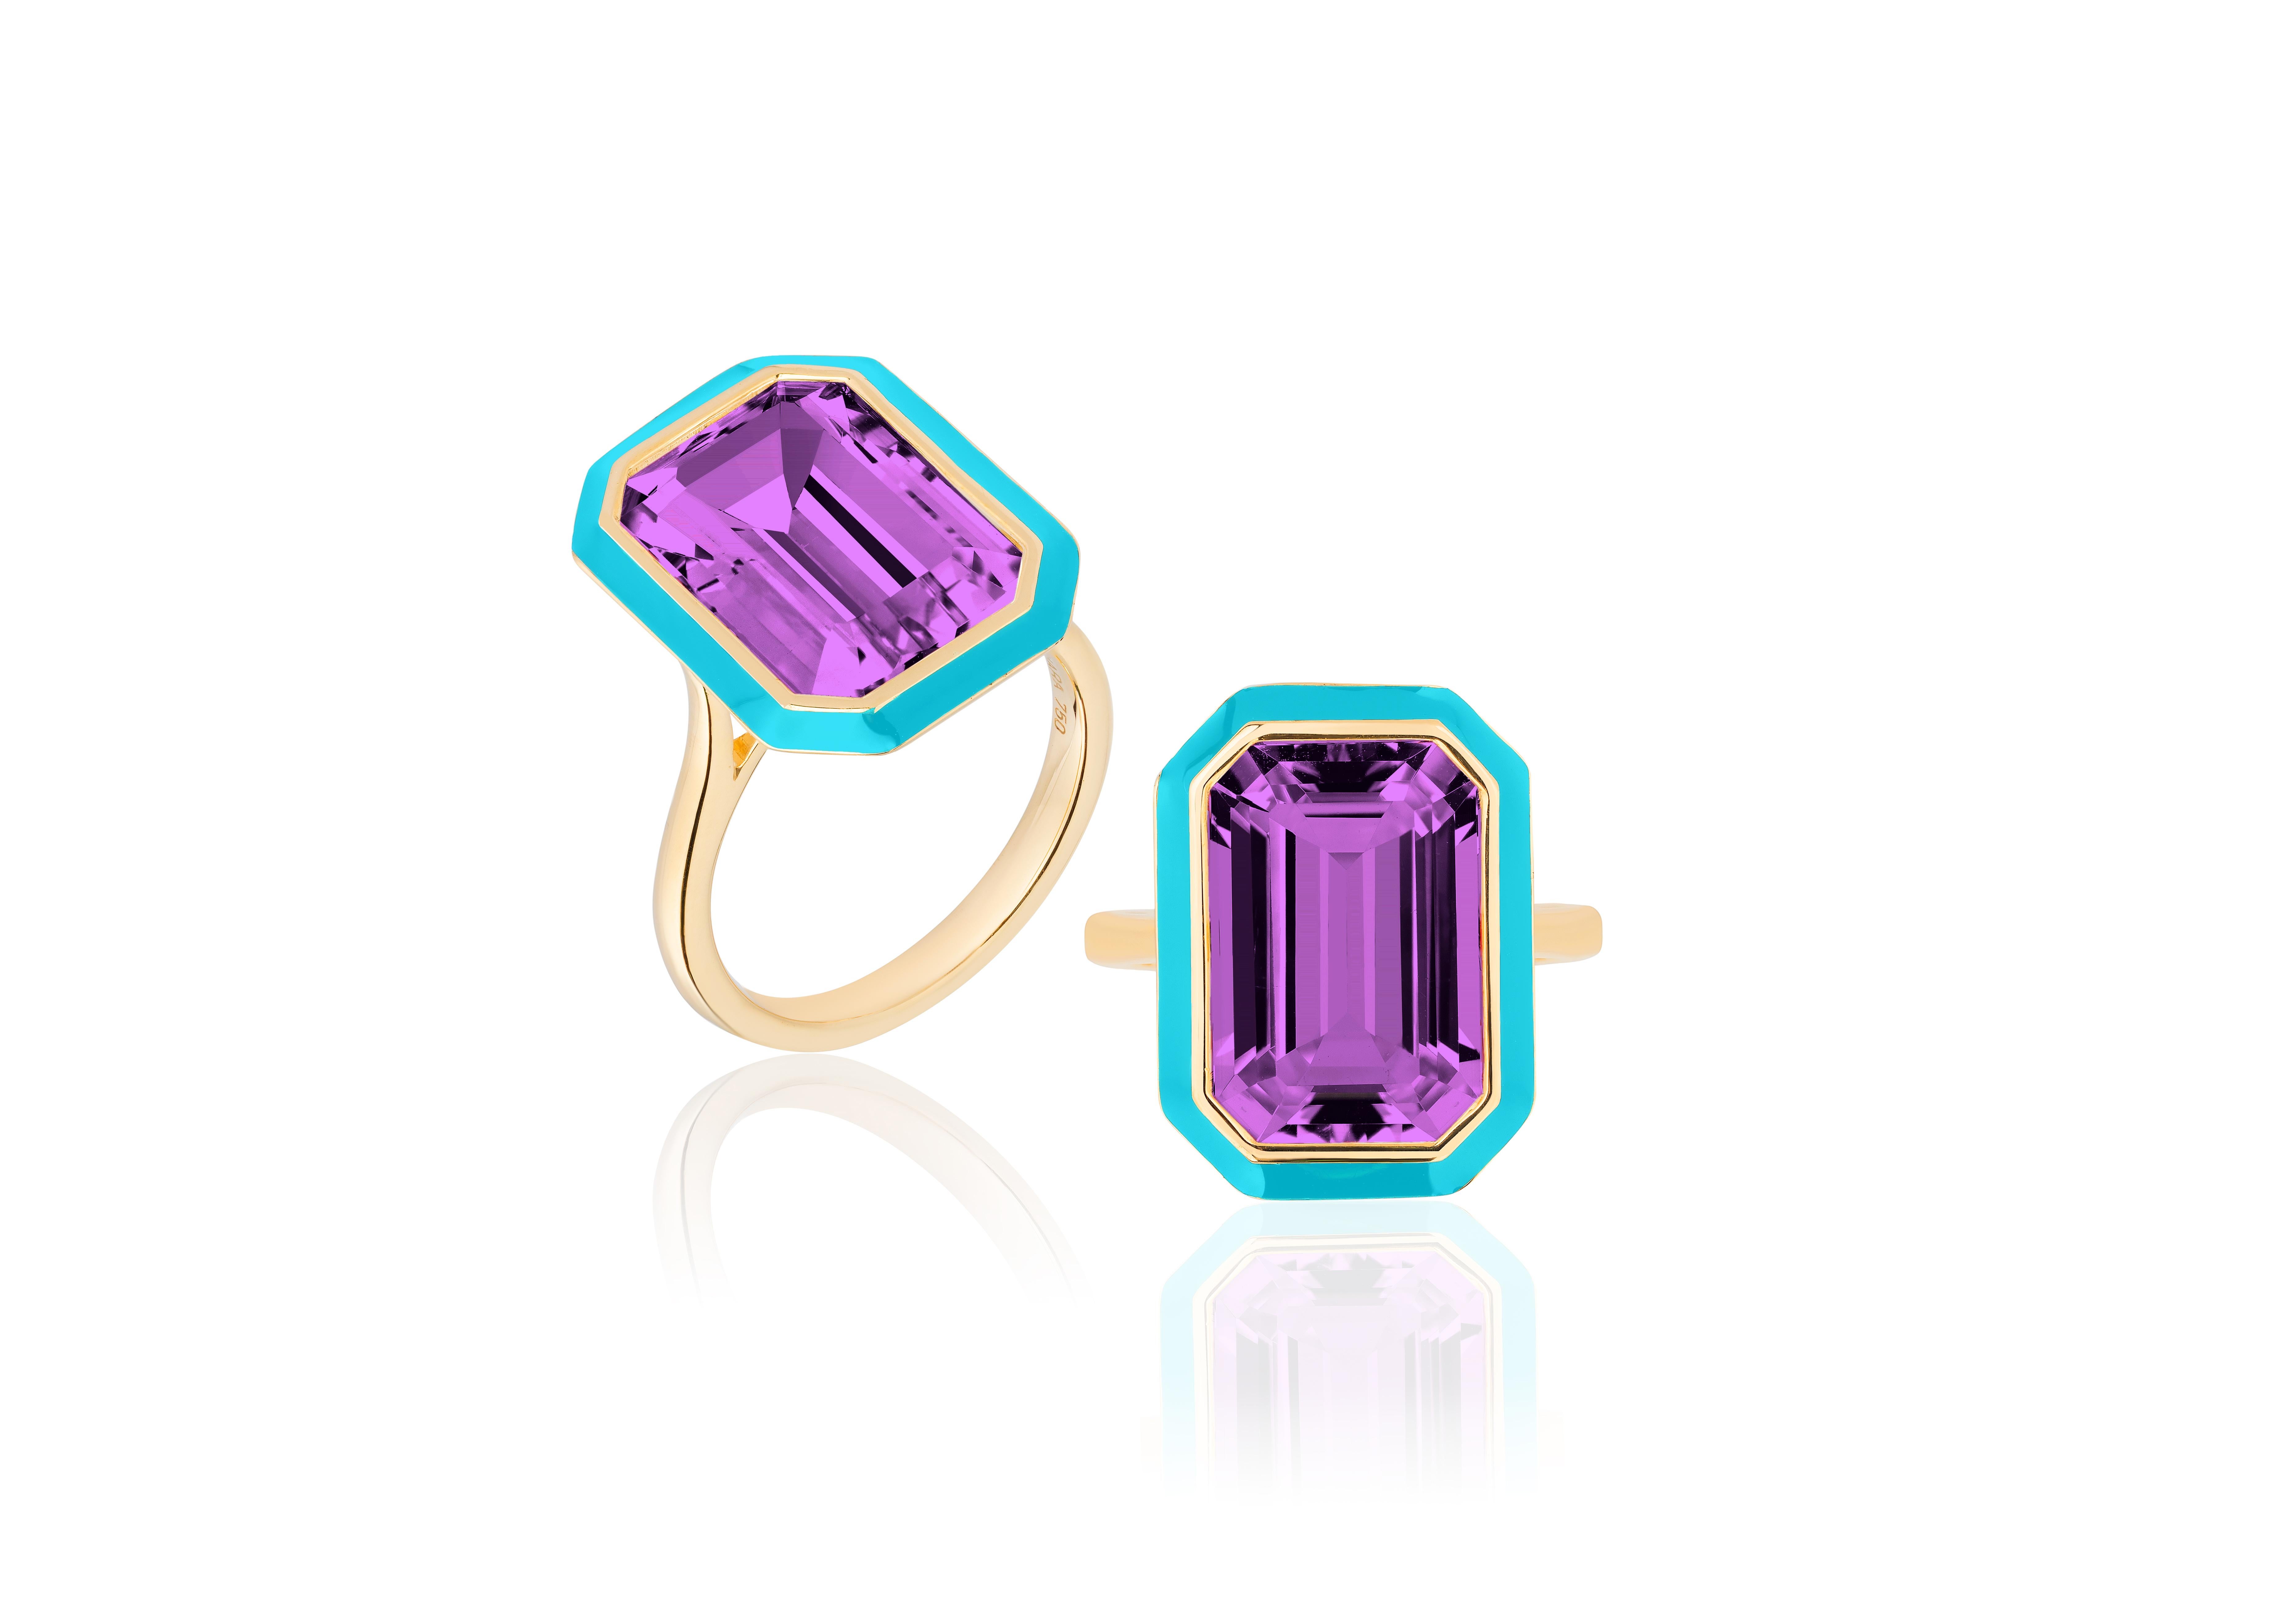 This is a unique combination of Amethyst and Turquoise enamel. If you want to make a statement this is the perfect ring to do it!

*A 10 x 15 mm Amethyst Emerald cut ring in a bezel setting, with Turquoise enamel in the borders.

*Gemstone: 100%